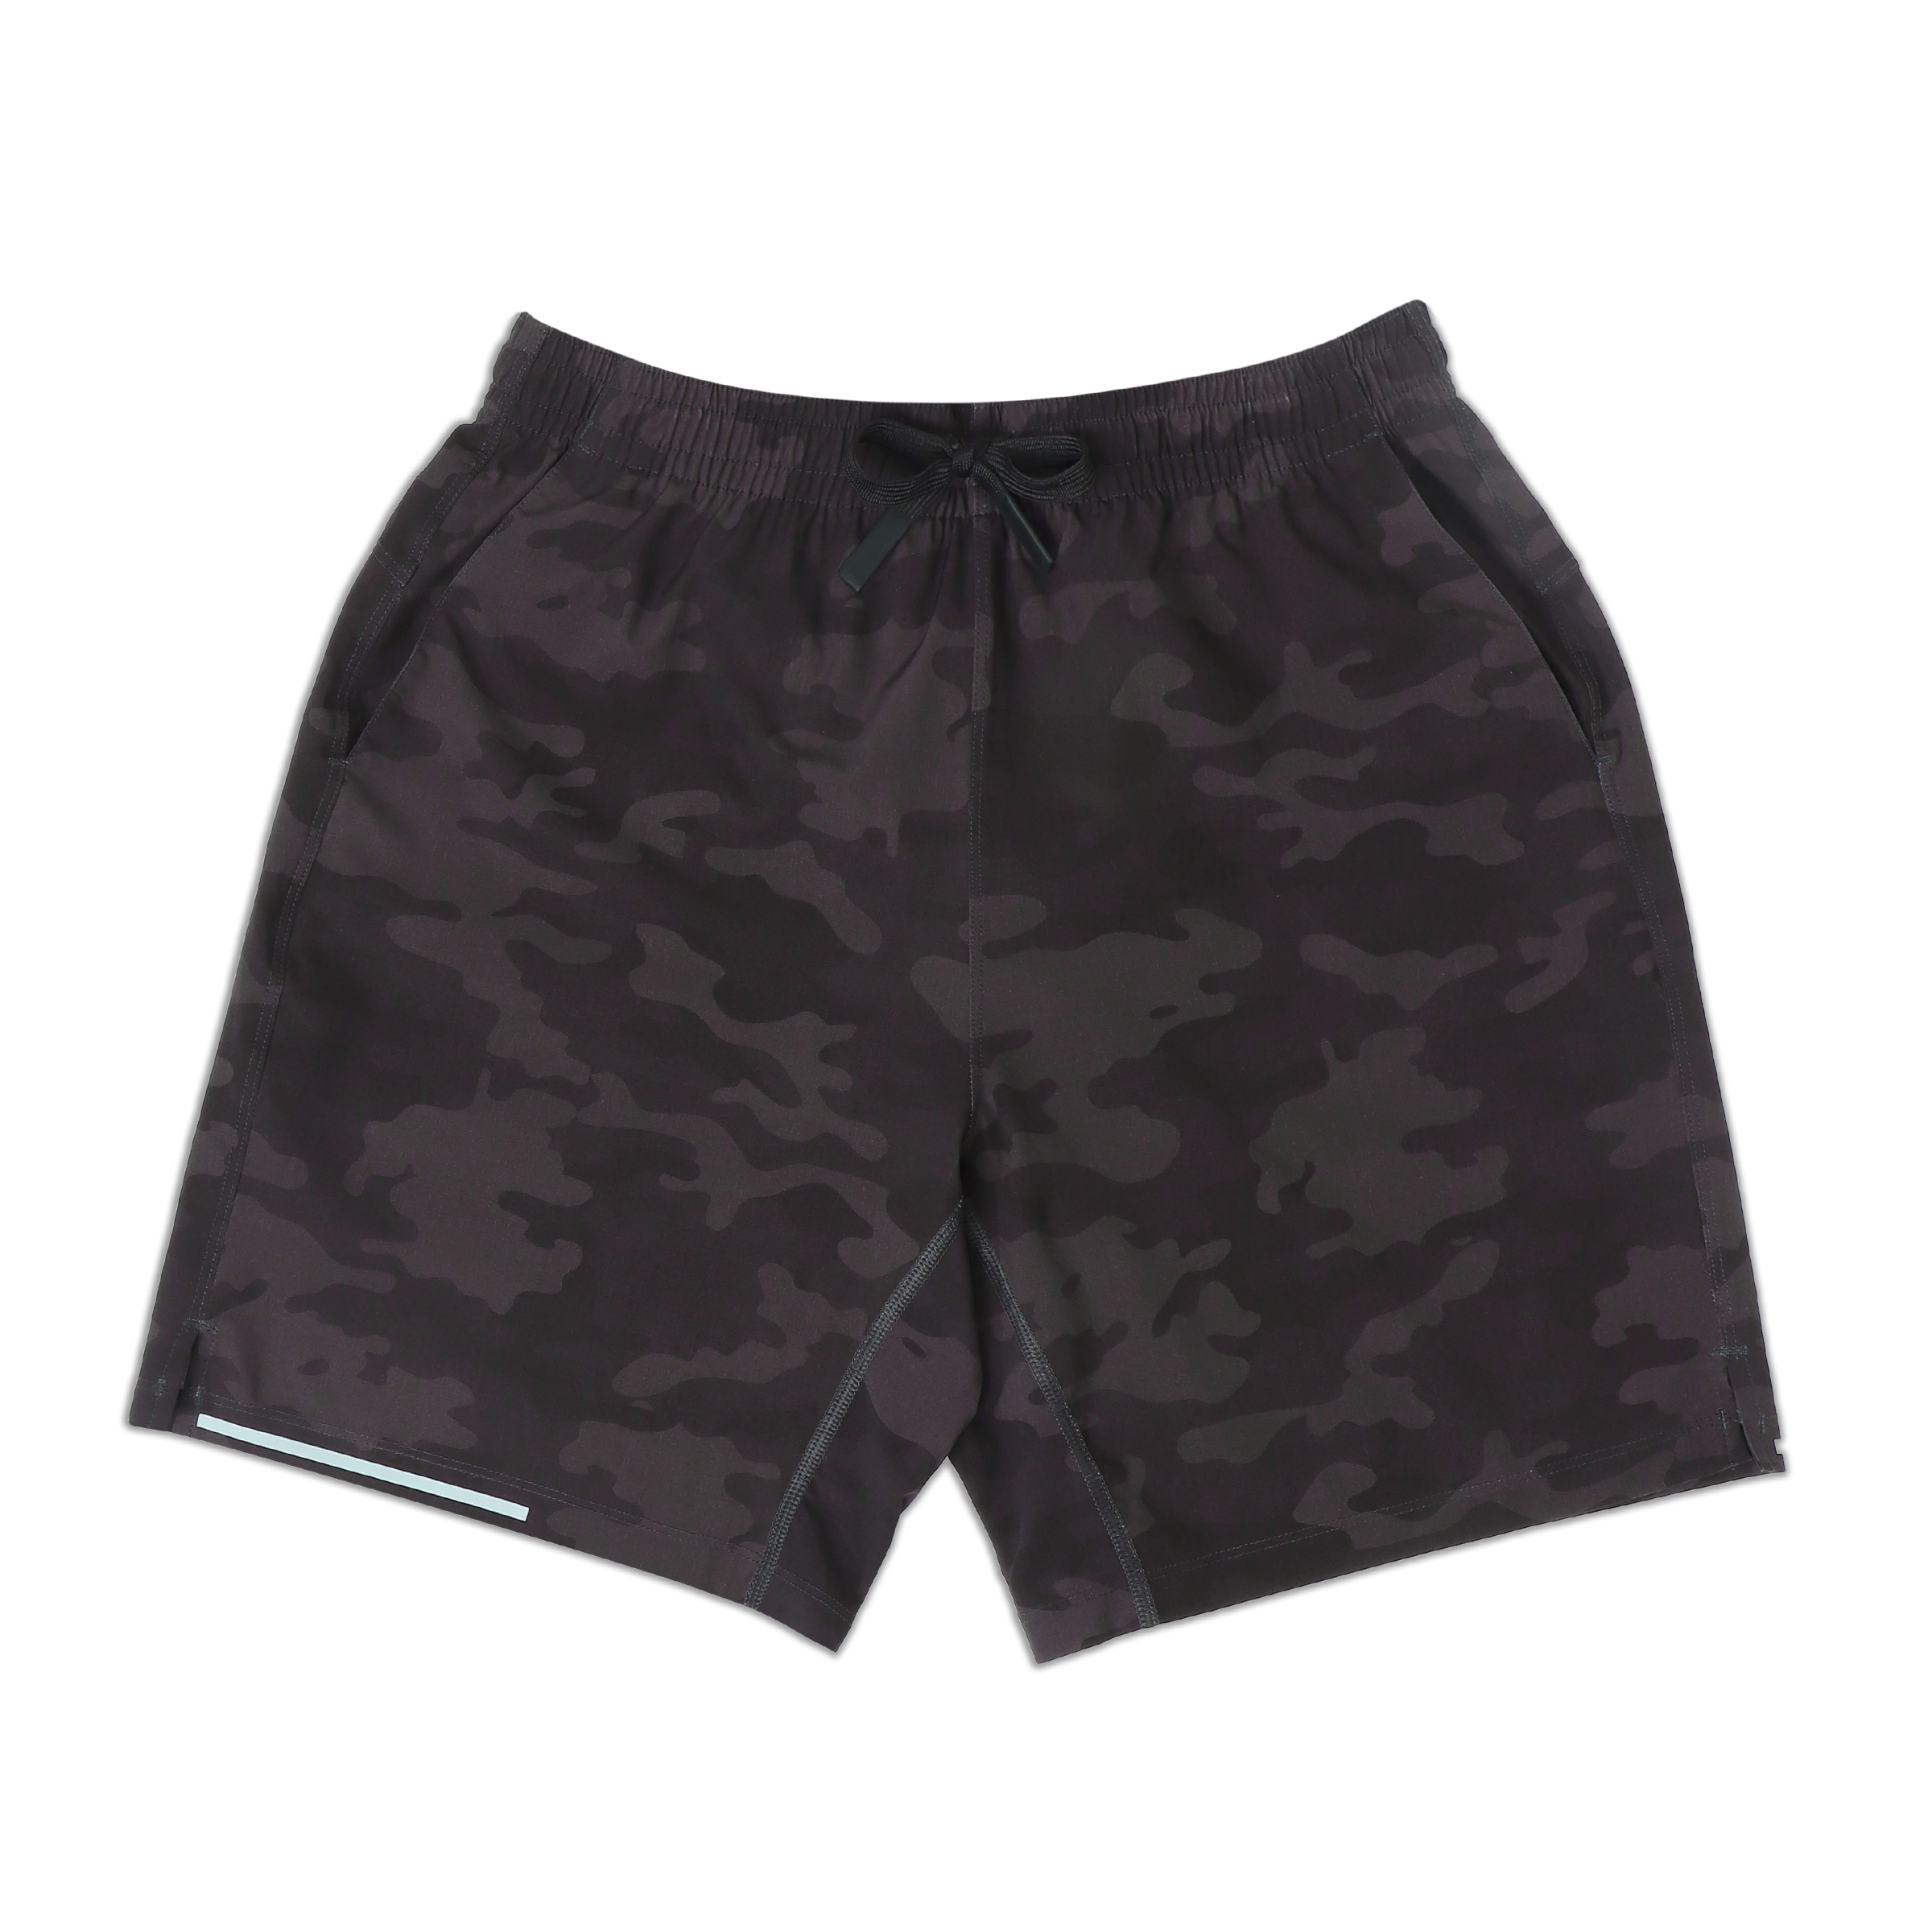 Run Short 5.5" Camo Black front with elastic waistband, black drawstring with rubberized tips, two front pockets, split hem, and reflective line on bottom right hem